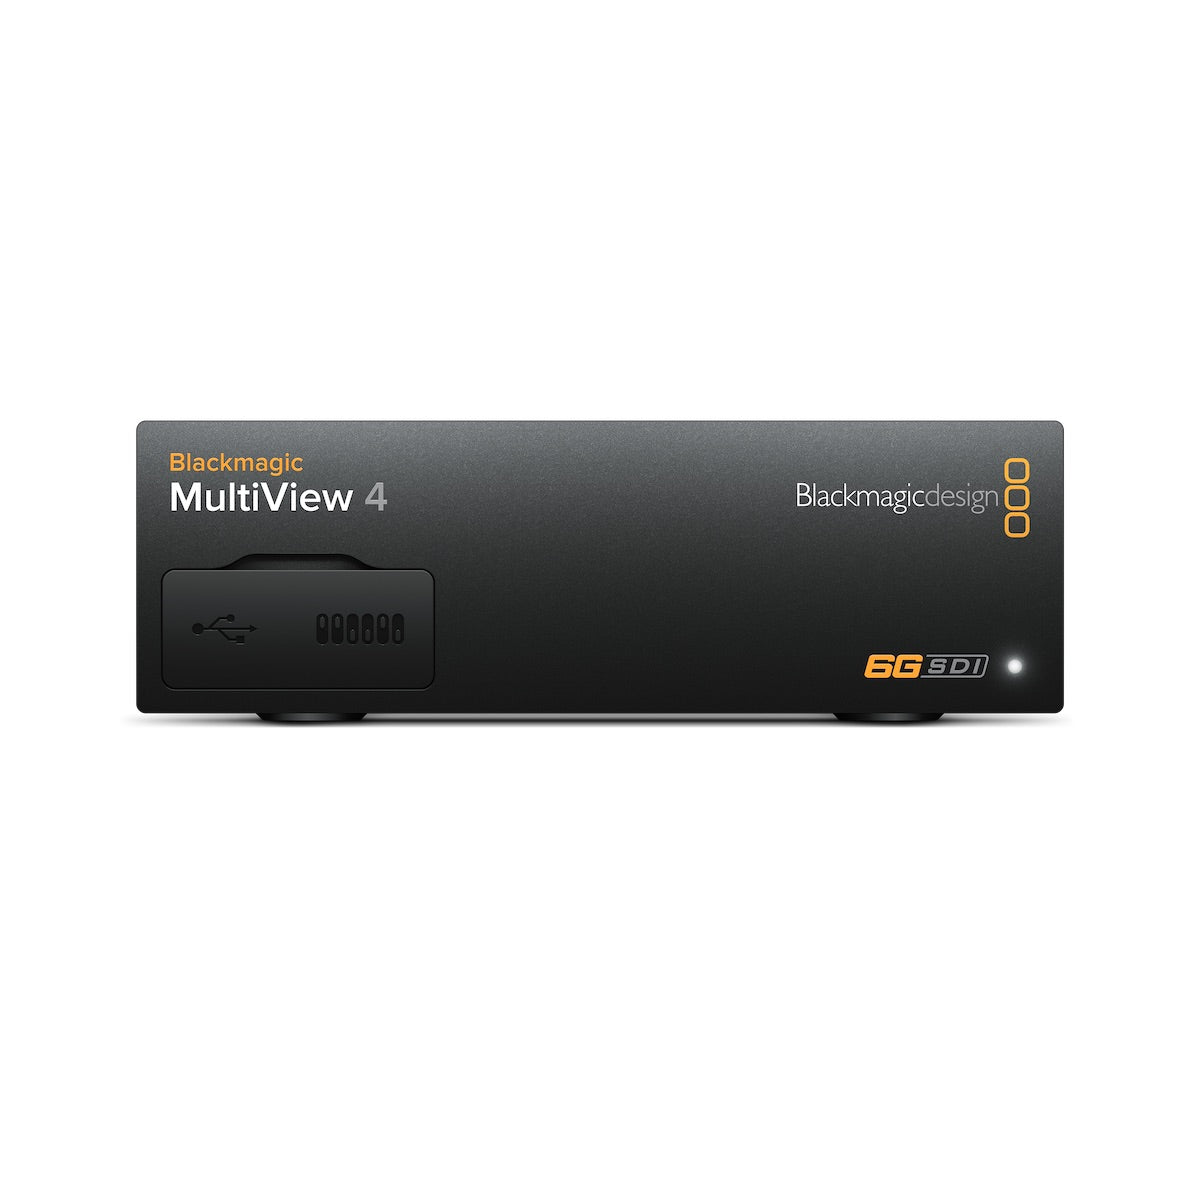 Blackmagic MultiView 4 - Ultra HD 4 Source Video Monitor, front